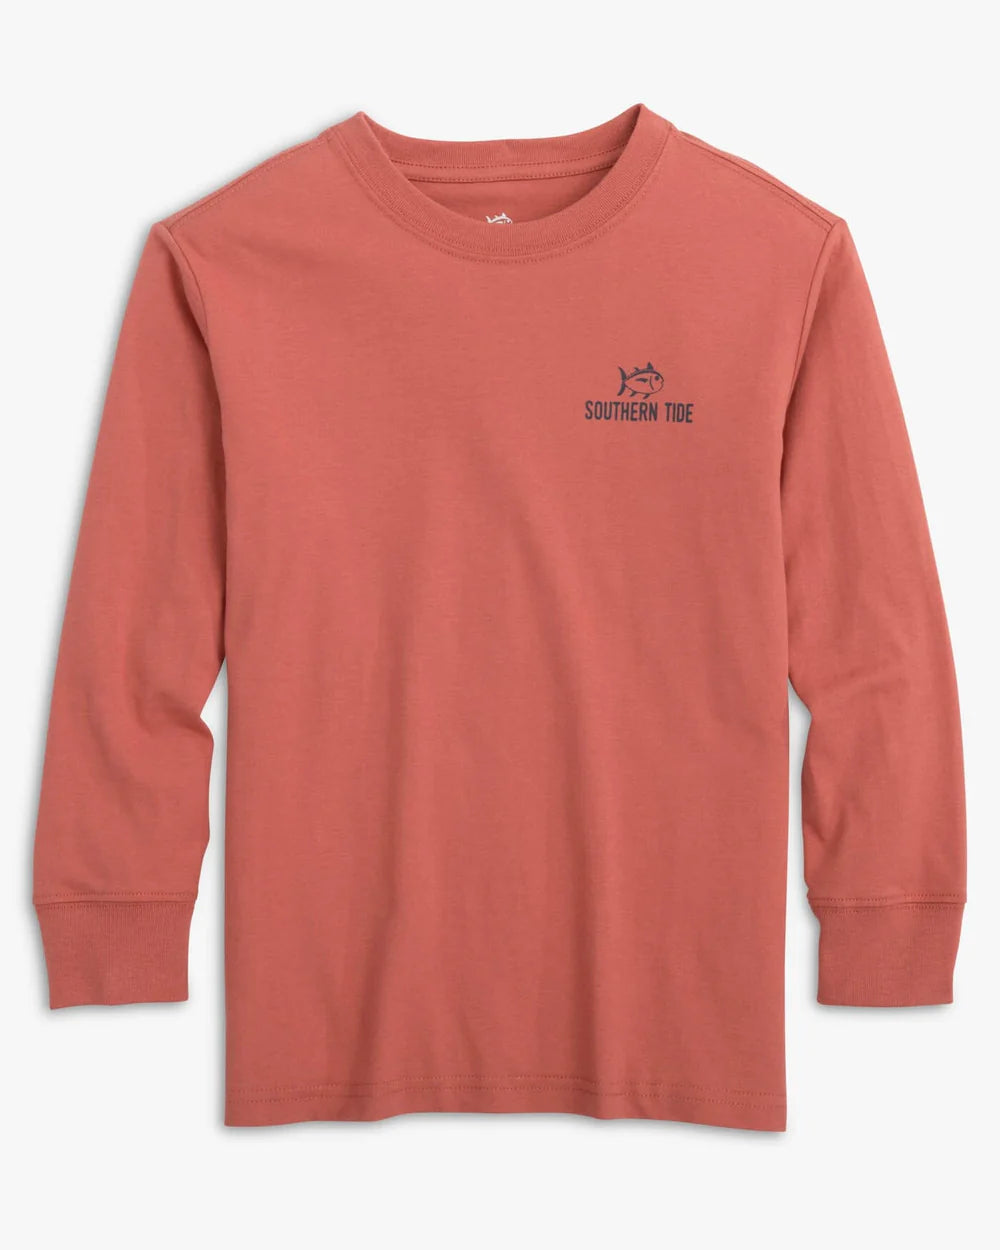 Southern Tide Gradient Tent Tee